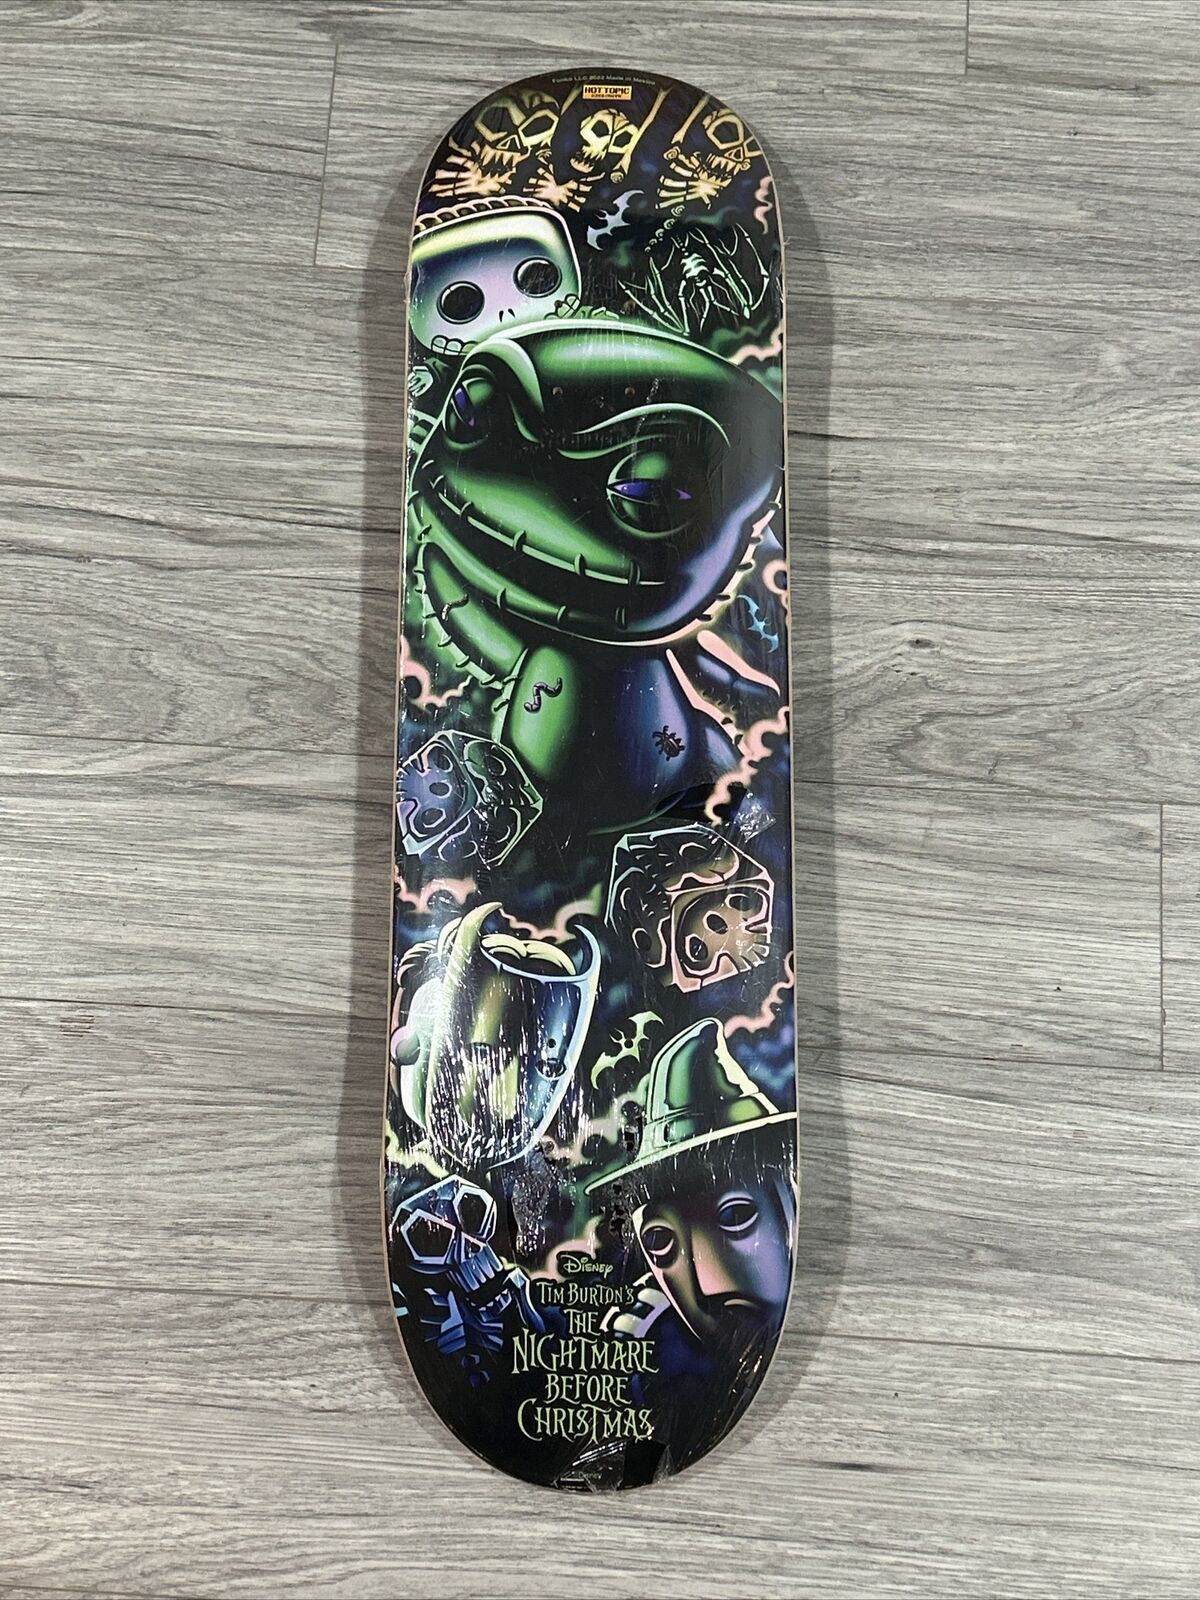 NIGHTMARE BEFORE CHRISTMAS FUNKO SKATE BOARD Deck Hot Topic Exclusive BRAND NEW